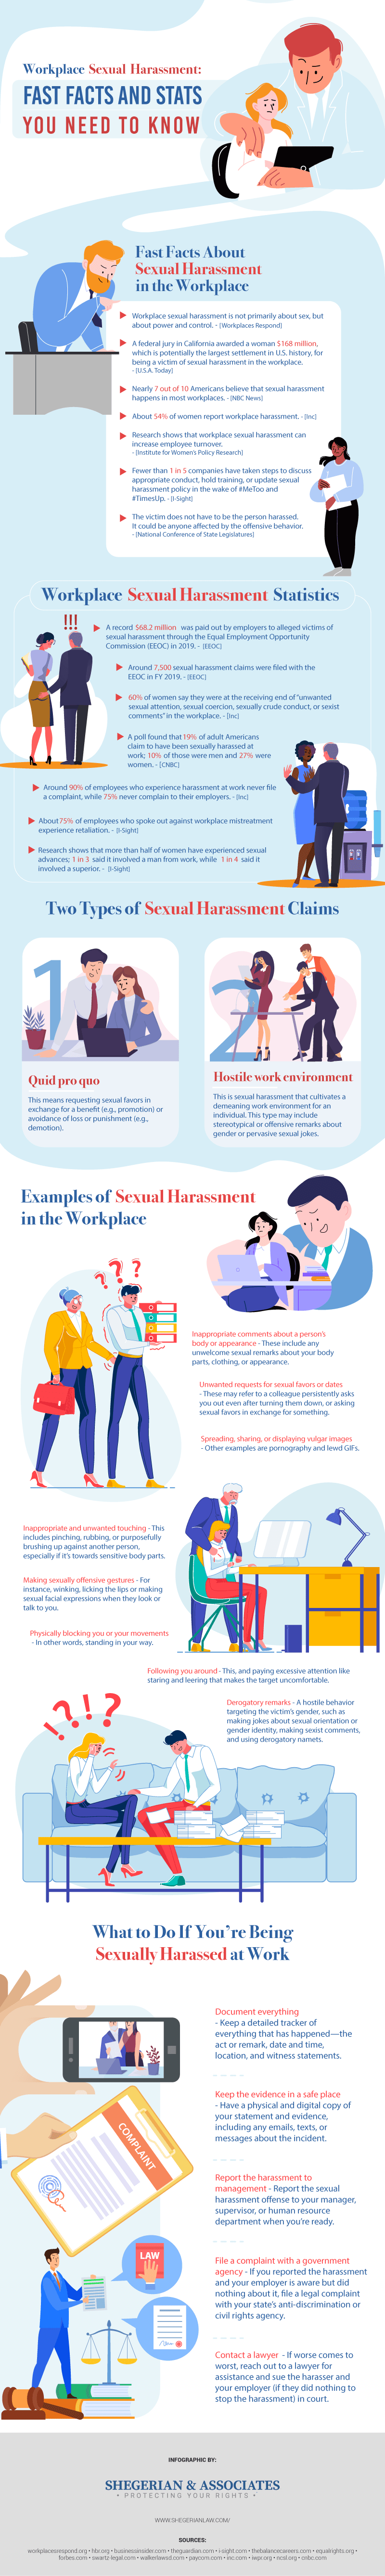 graphic listing statistics about workplace sexual harassment